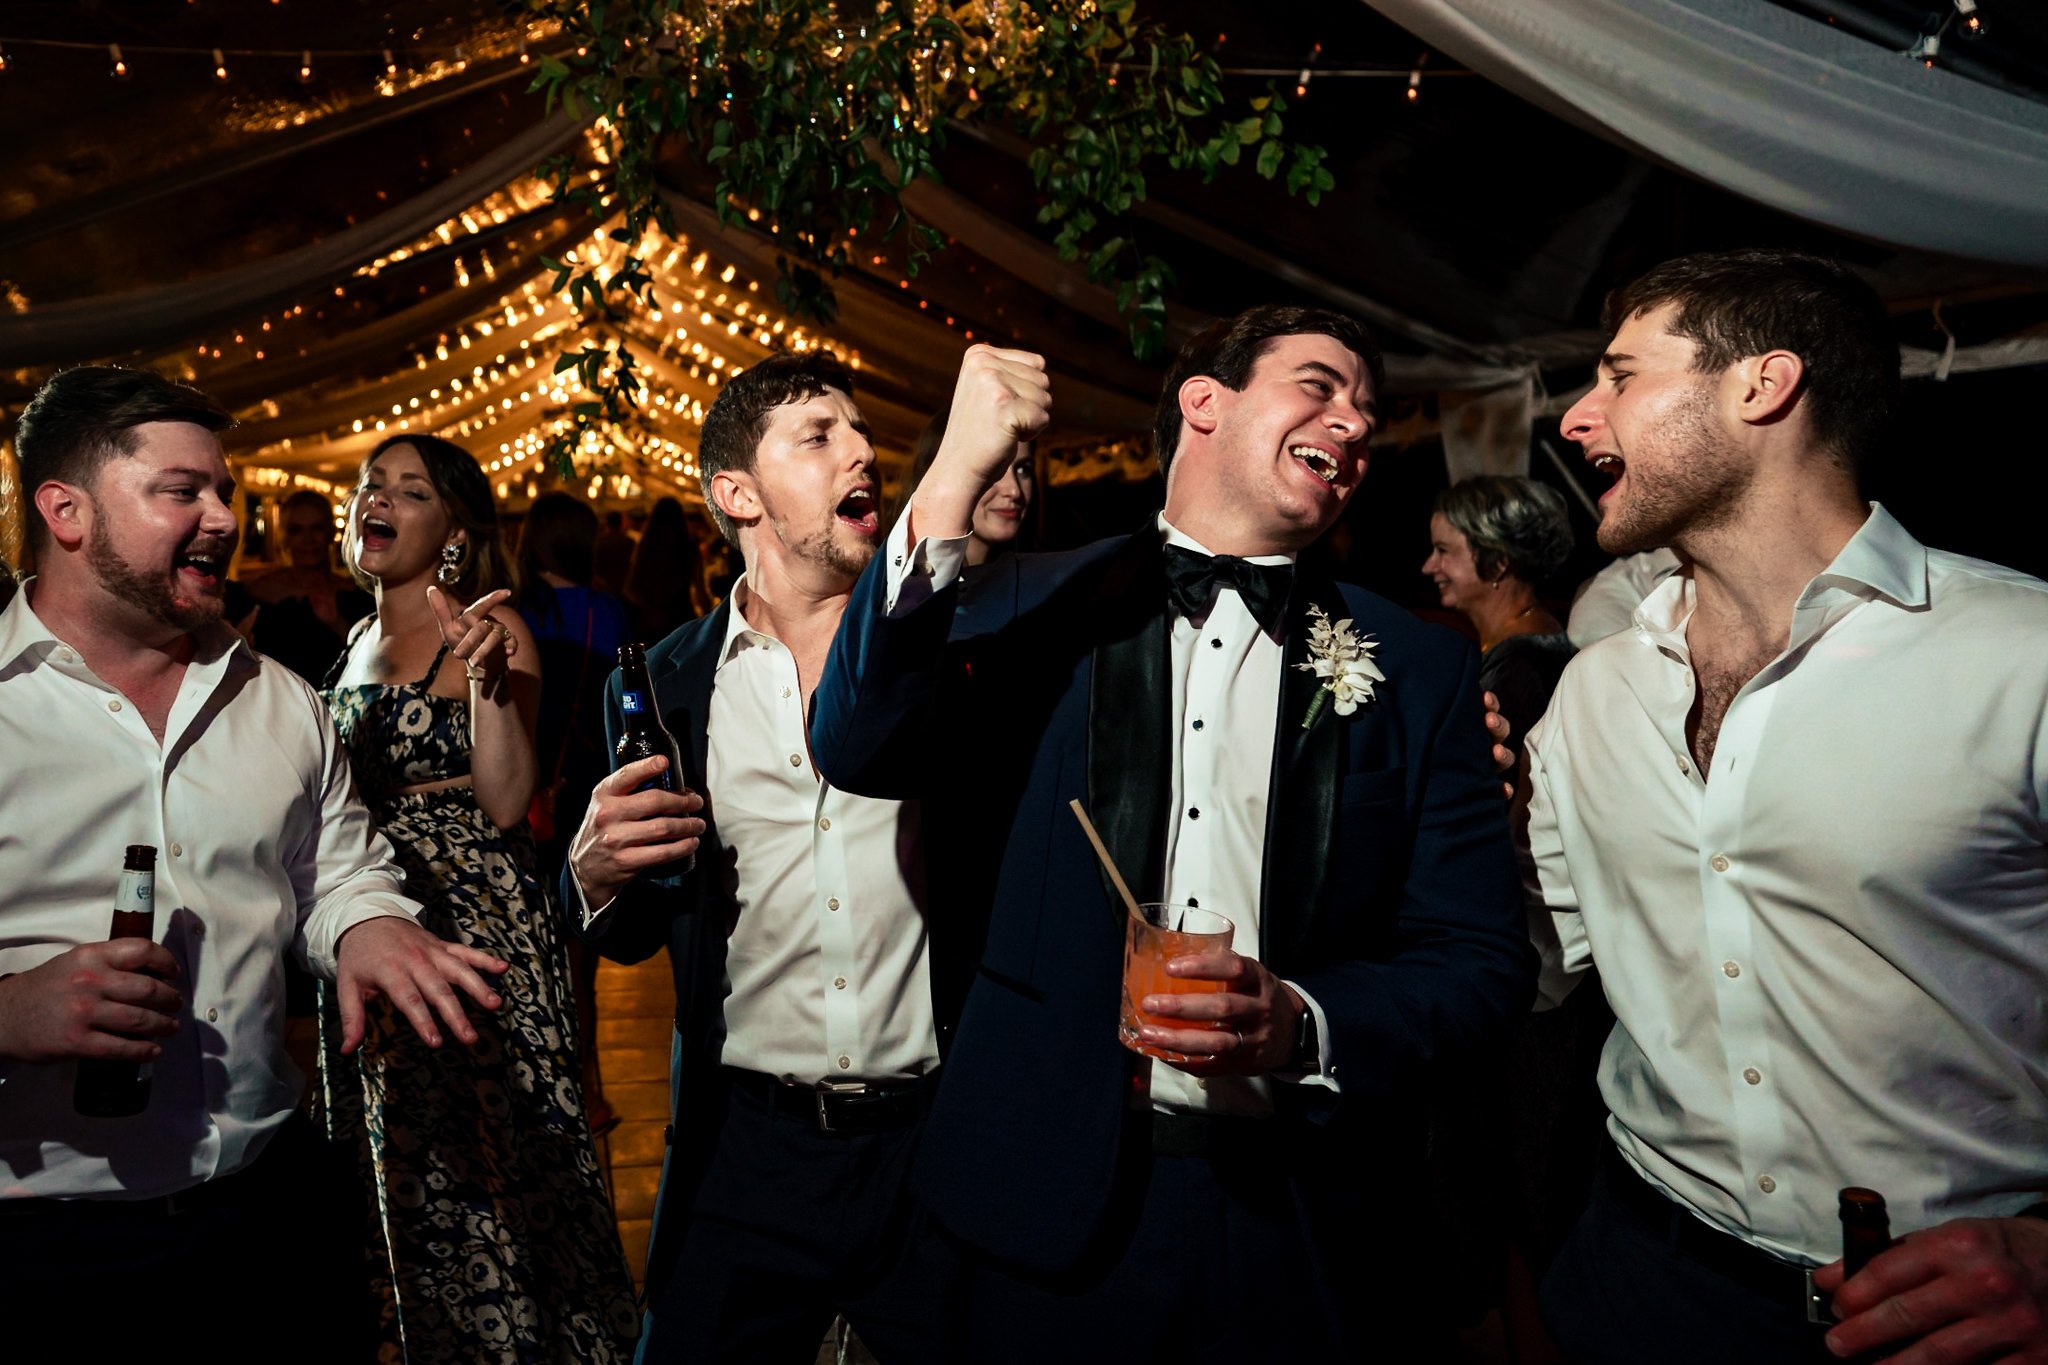 The best man and his group of men in tuxedos celebrating at a wedding.